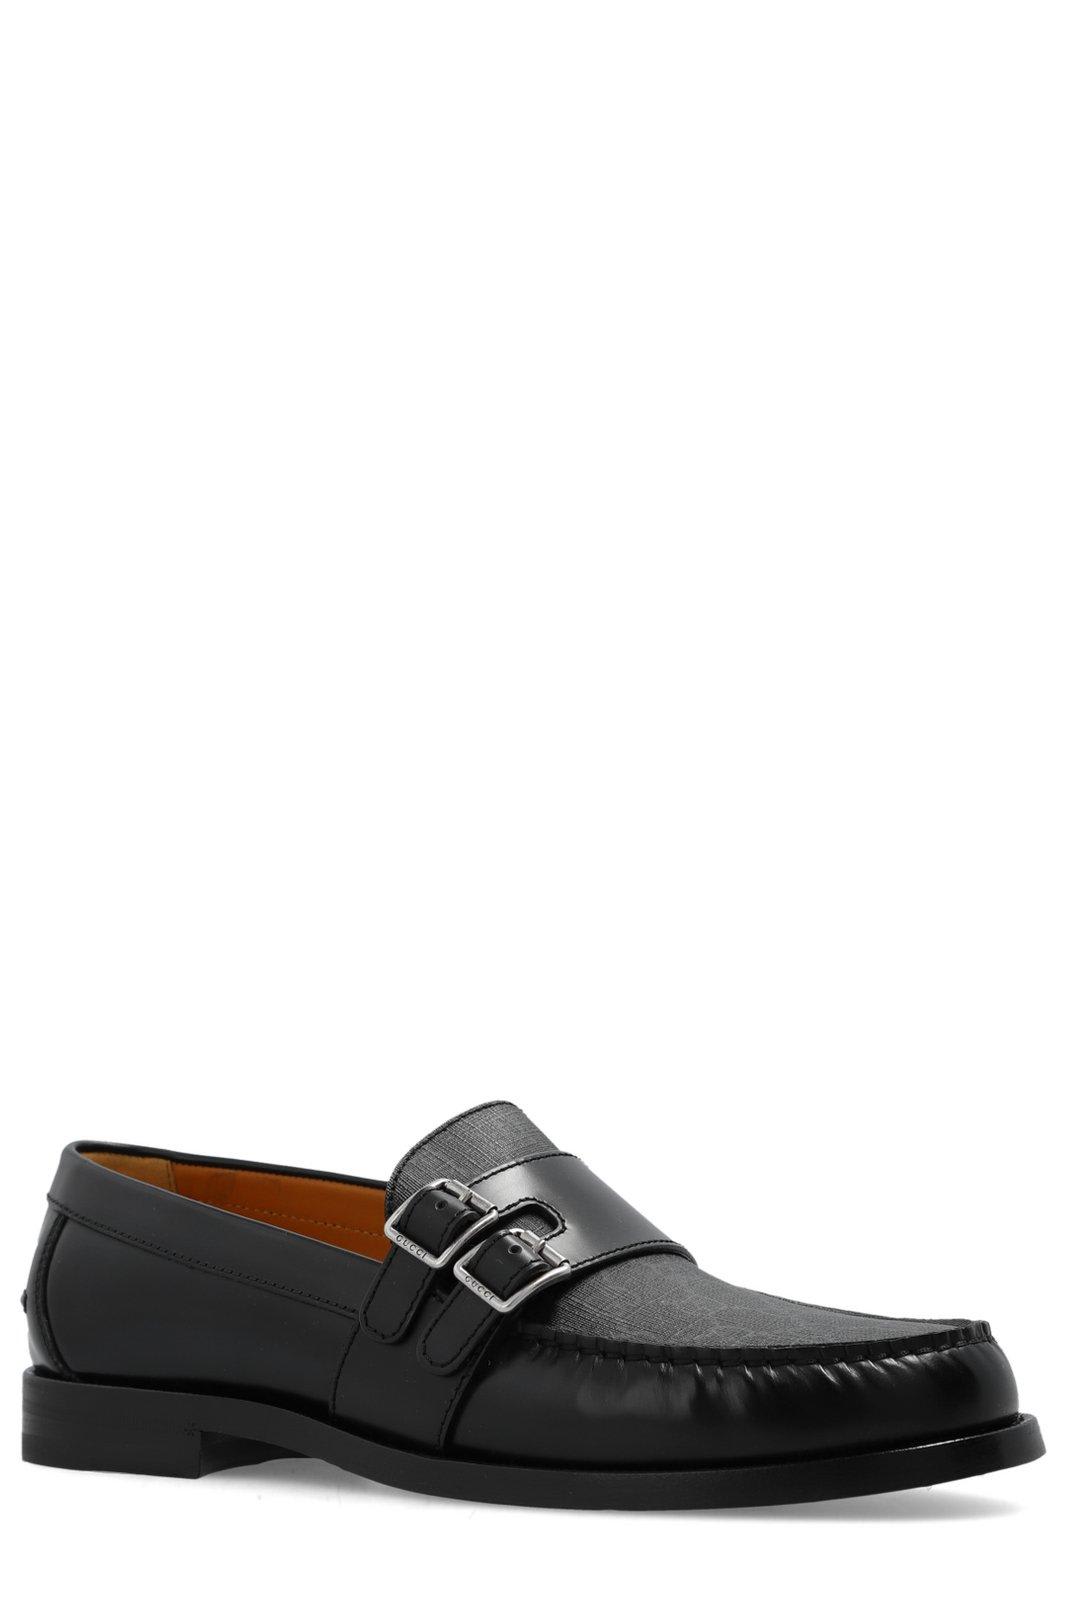 Shop Gucci Buckle Detailed Loafers In Black